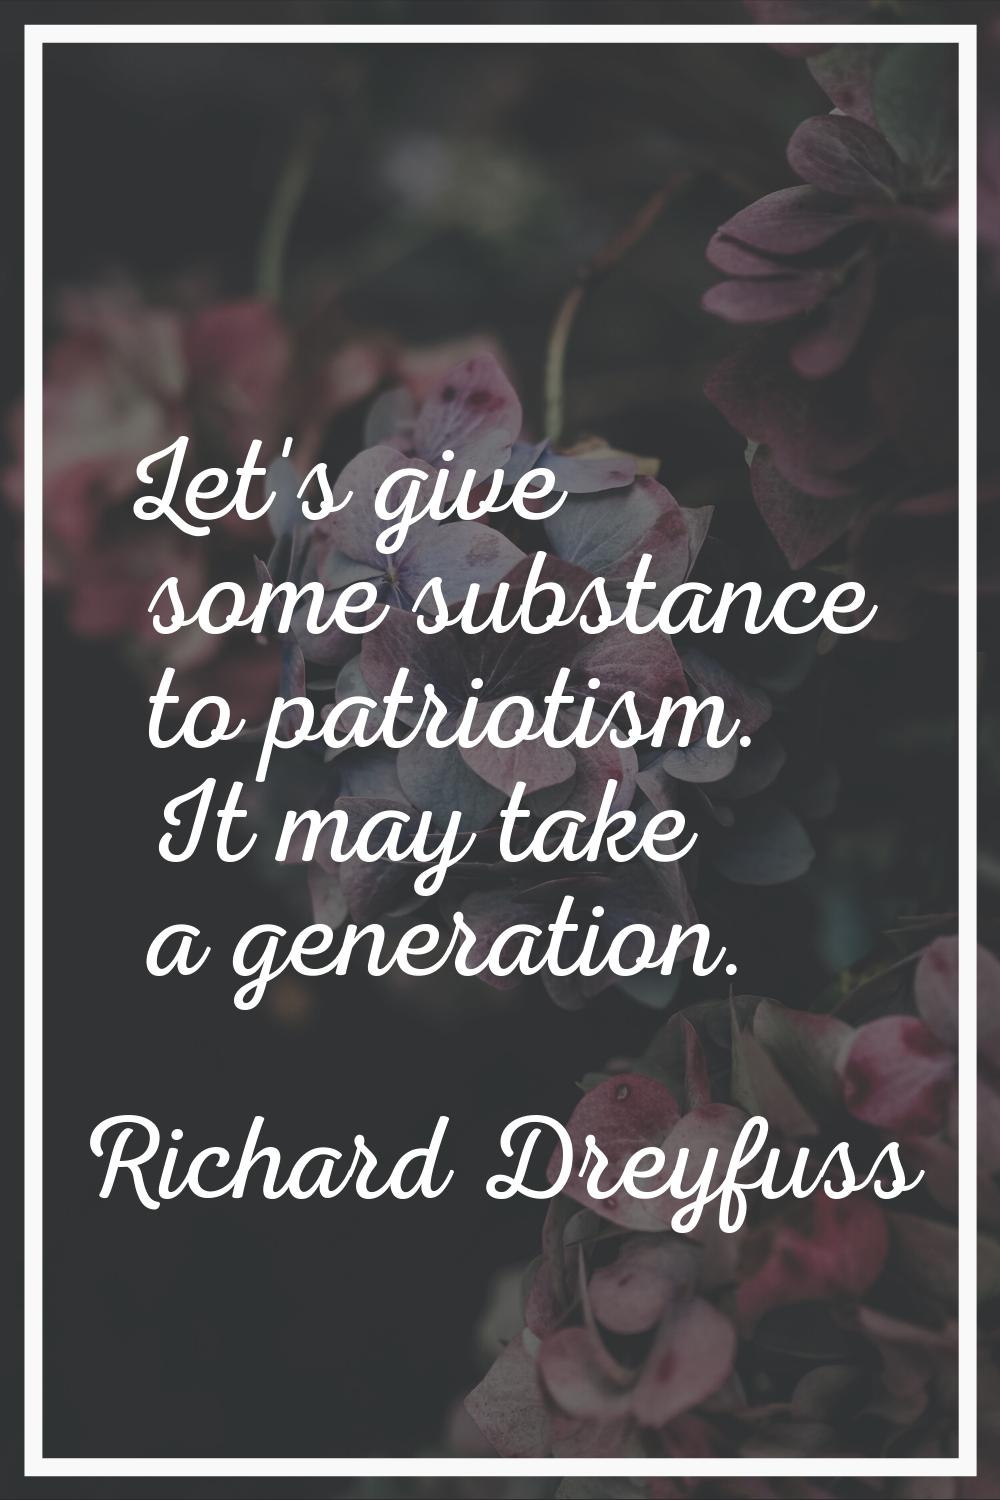 Let's give some substance to patriotism. It may take a generation.